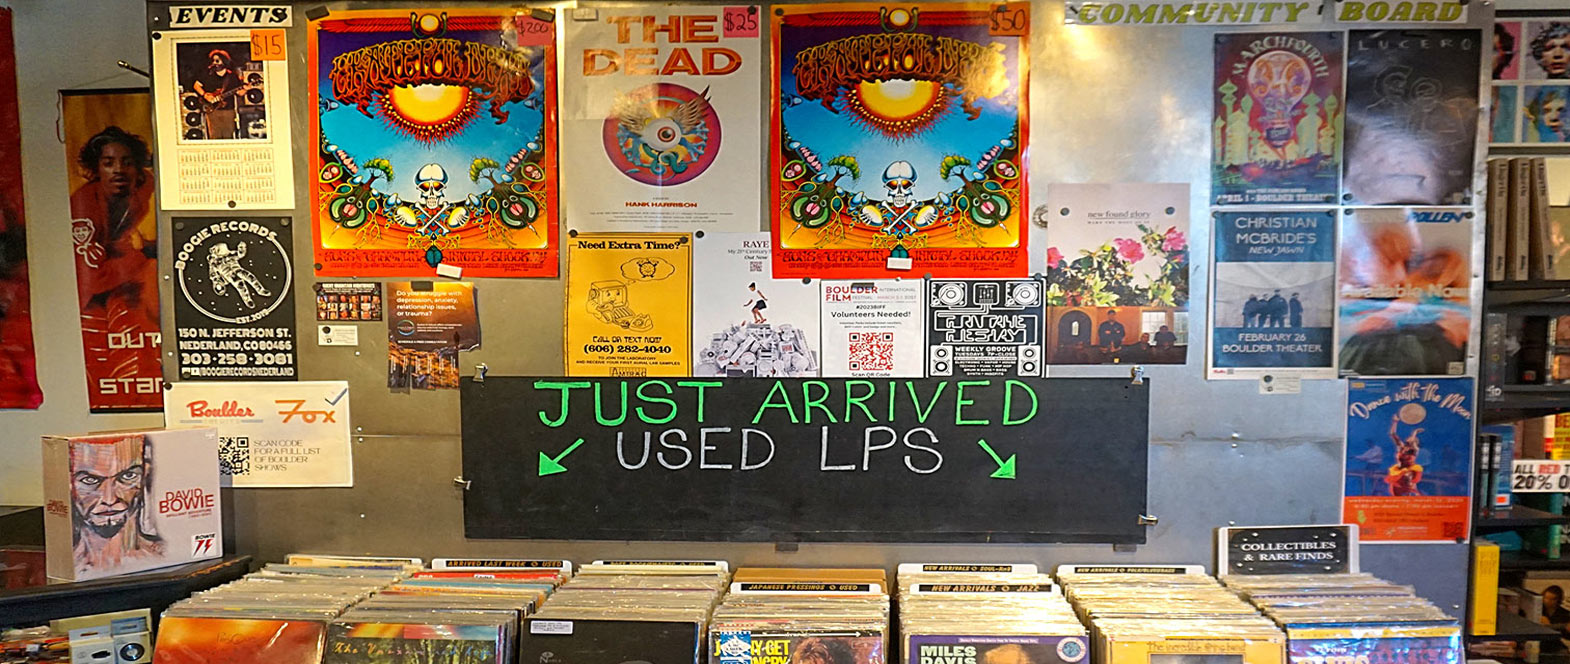 Paradise Found Records & Music – New and vinyl records, CDs, audio equipment merchandise in CO